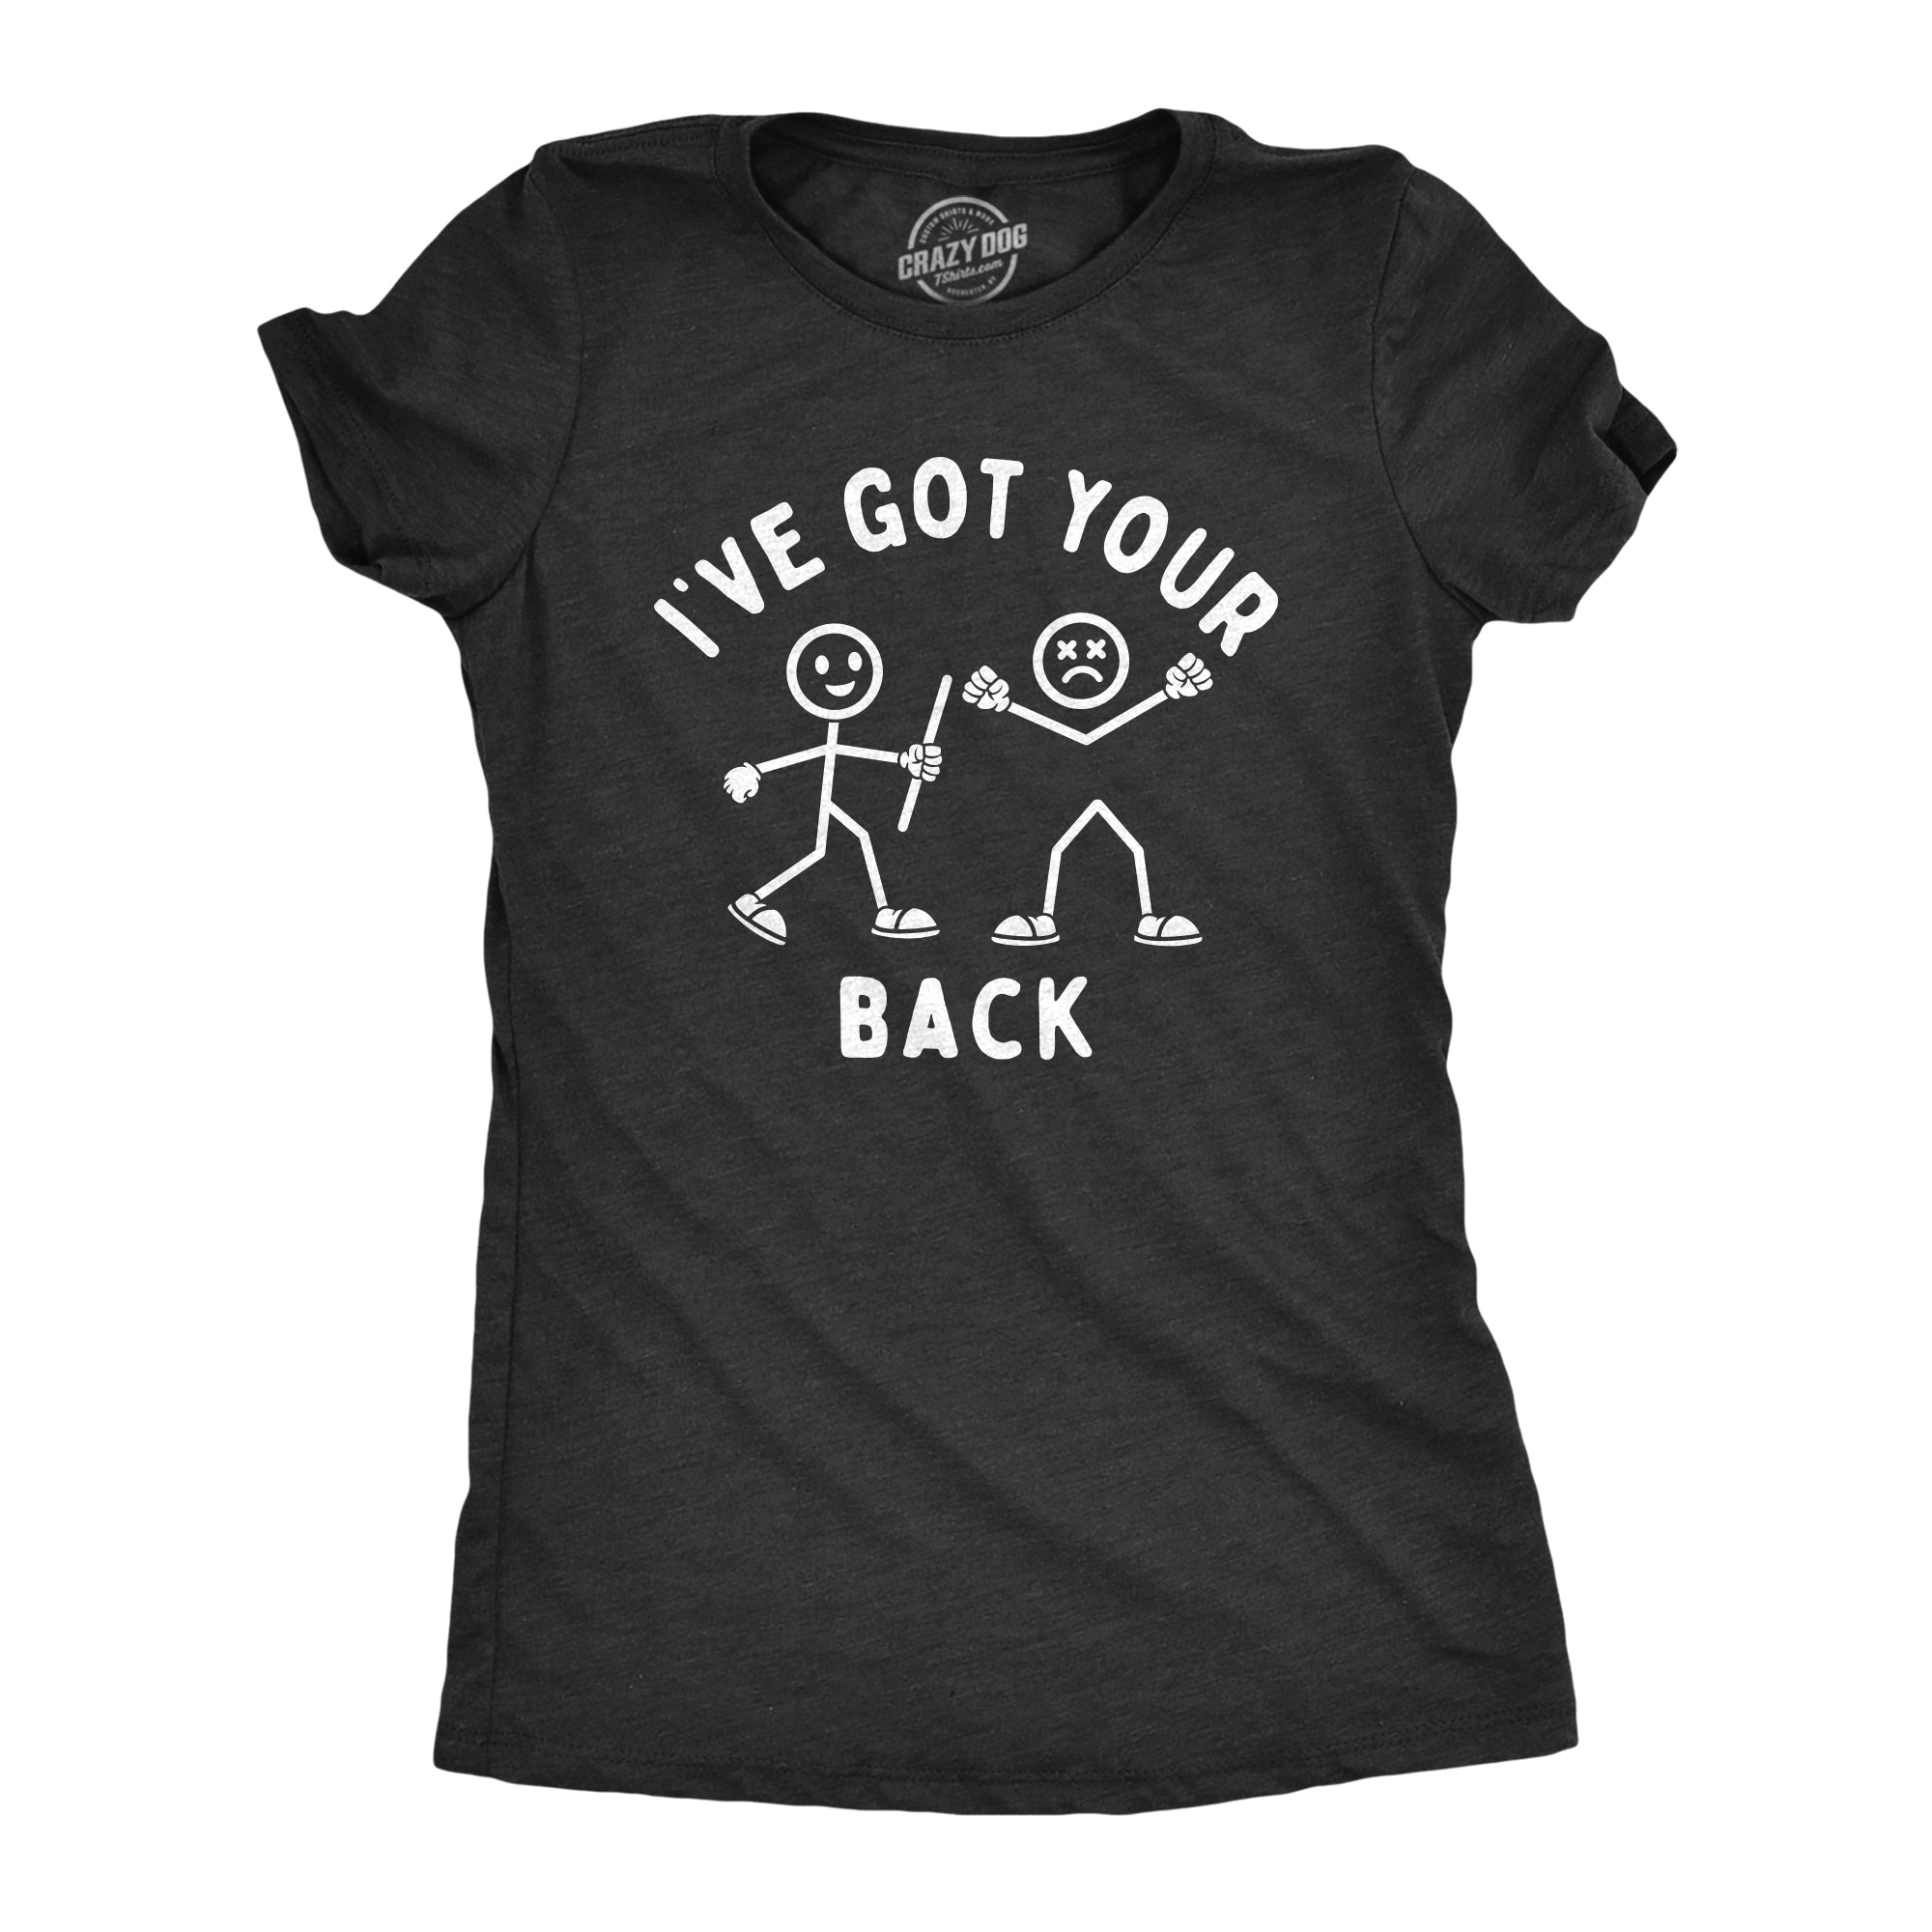 Funny Heather Black - BACK Ive Got Your Back Womens T Shirt Nerdy Sarcastic Tee